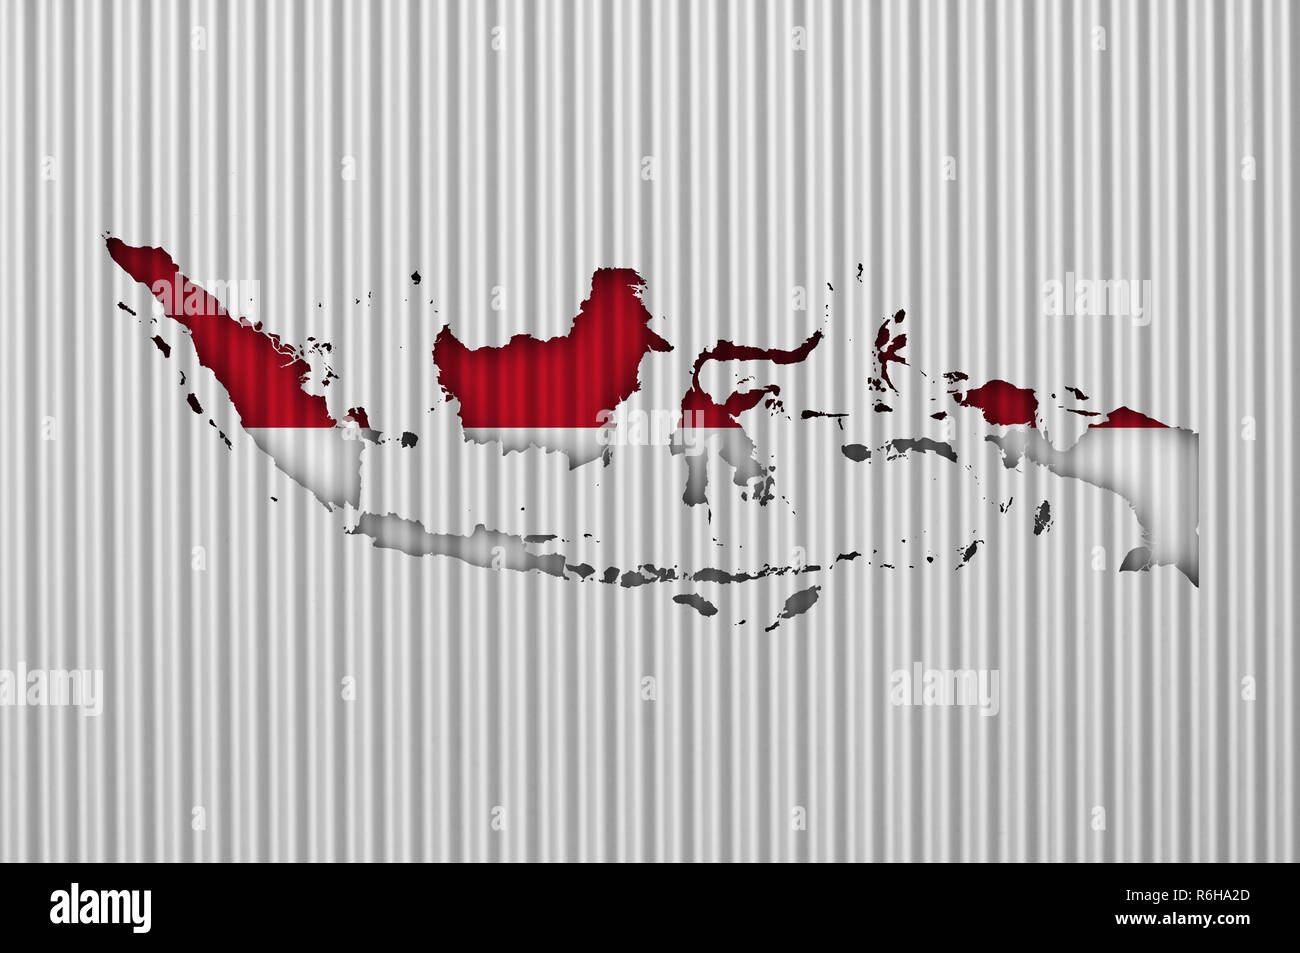 map and banner of indonesia on corrugated iron Stock Photo